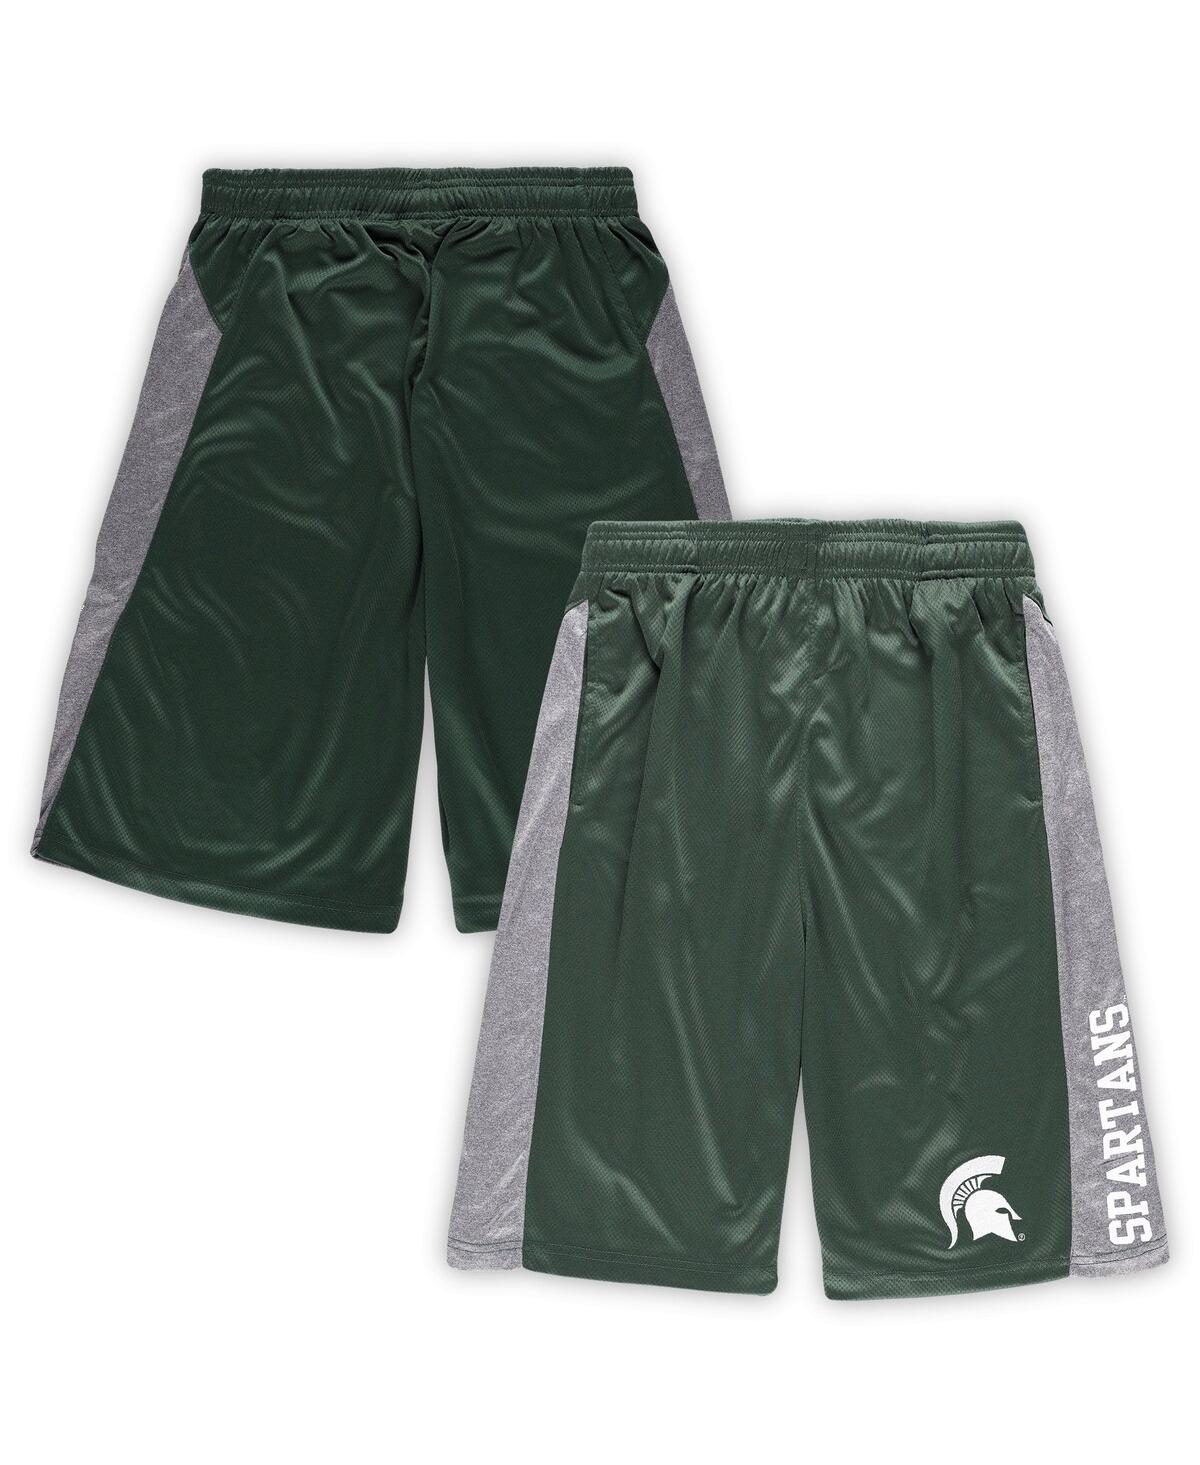 Shop Profile Men's Green Michigan State Spartans Big And Tall Textured Shorts